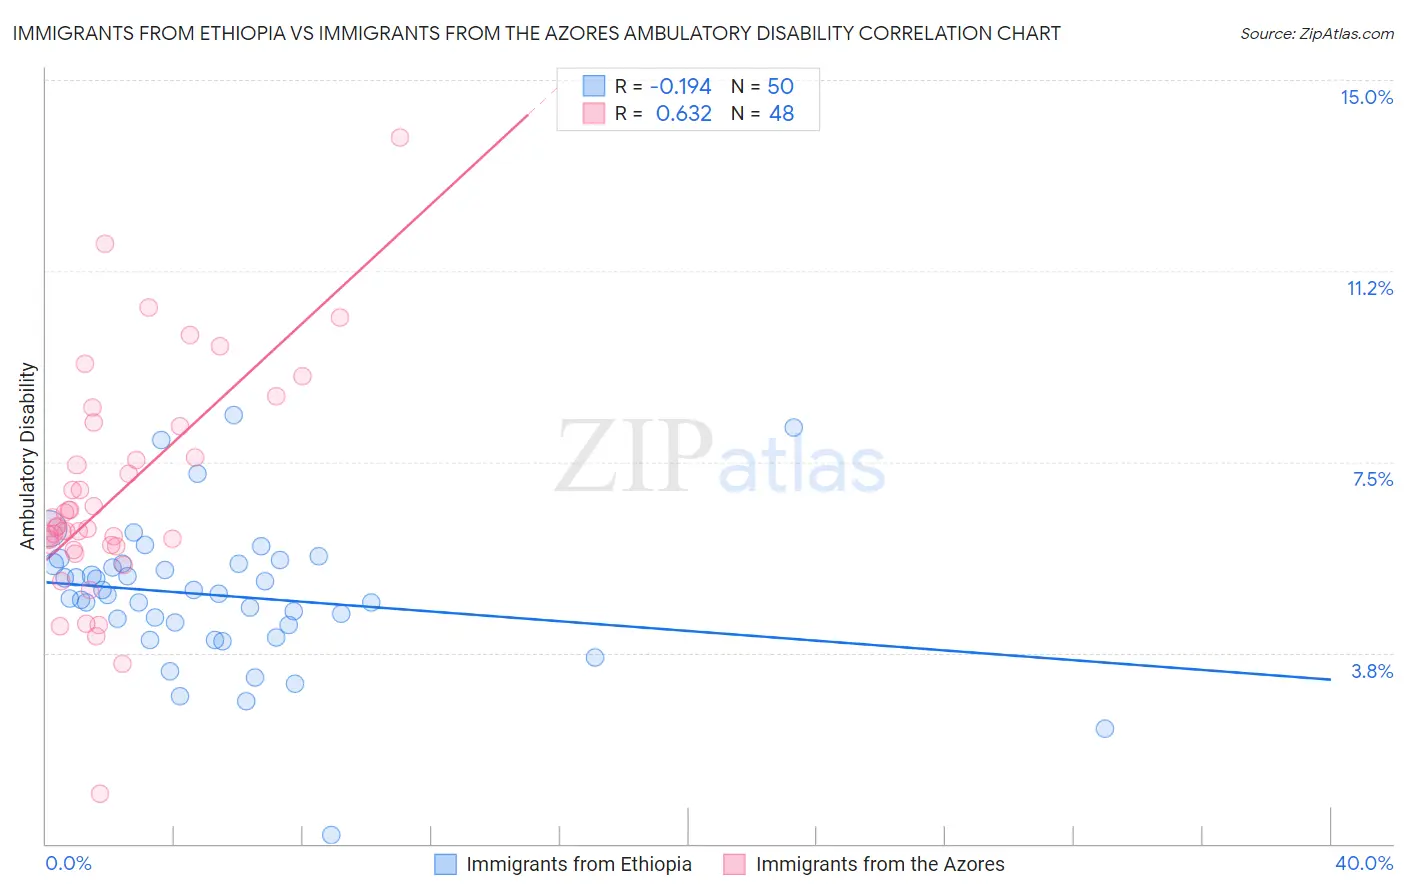 Immigrants from Ethiopia vs Immigrants from the Azores Ambulatory Disability